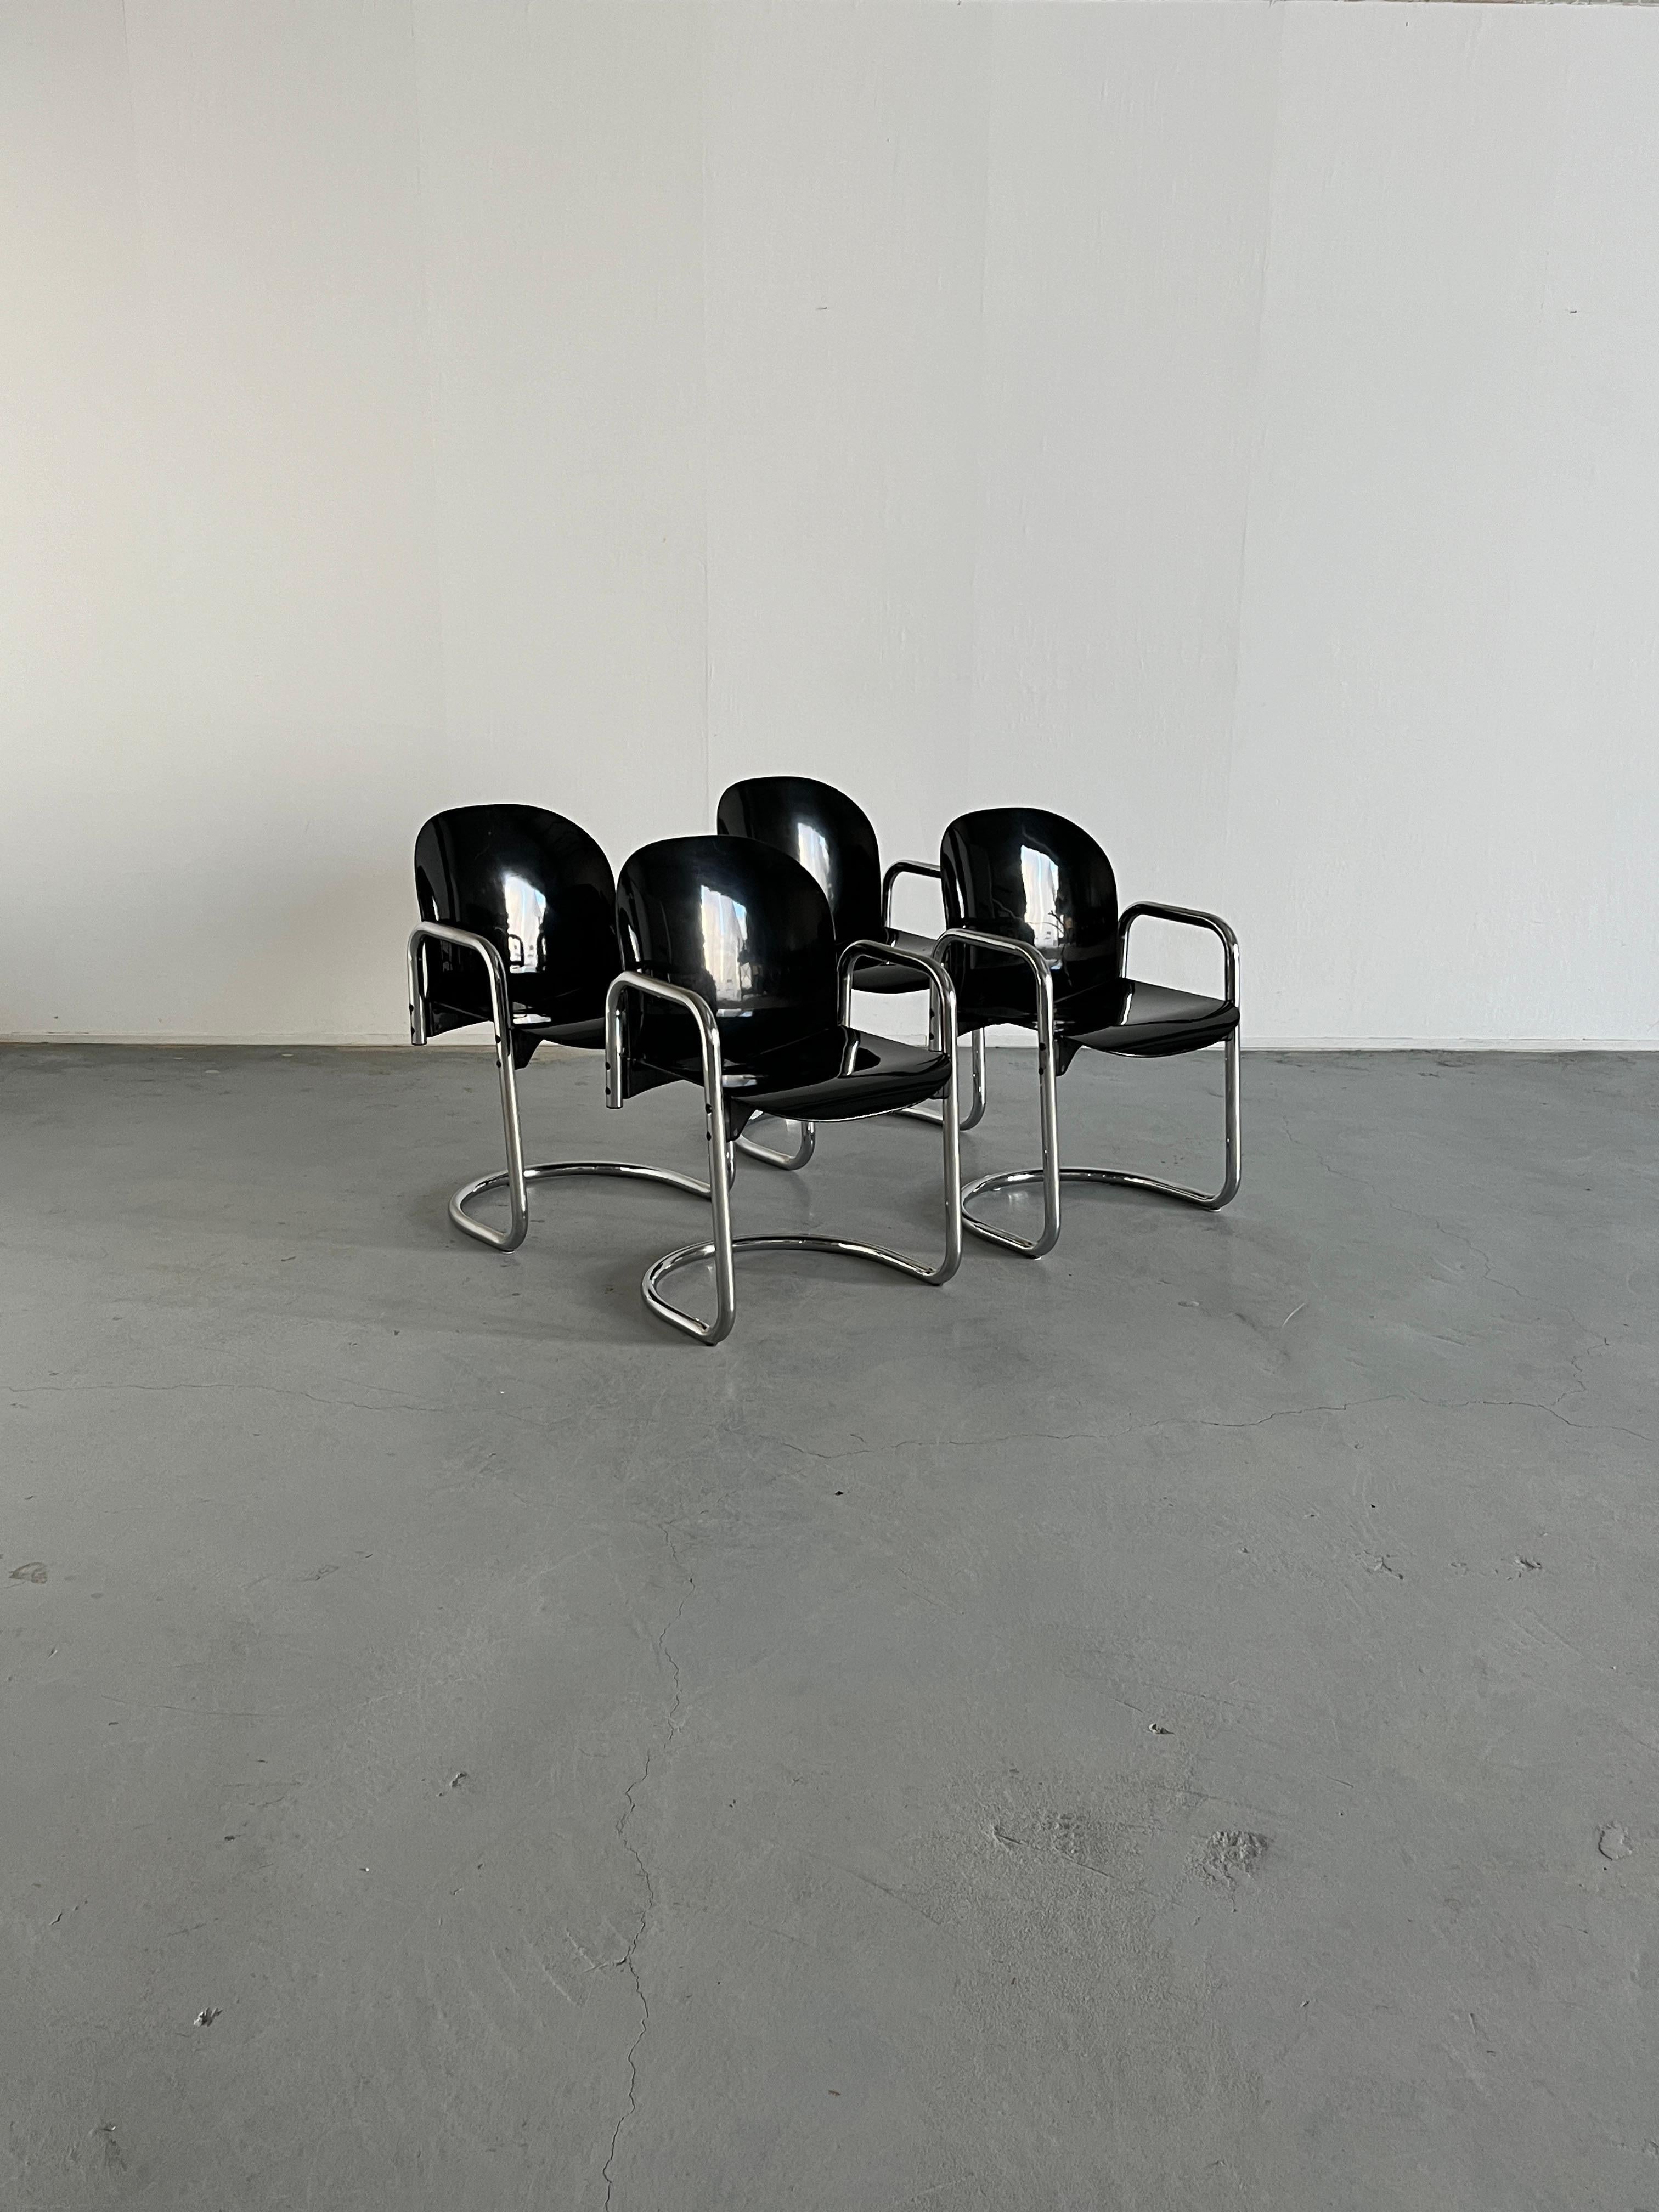 Set of four 'Dialogo' chromed dining chairs by Afra and Tobia Scarpa for B&B Italia, 1970s.
The 'Dialogo' model, also known as 'Dessau' model in later production (or 'Dialogo Dessau), with its distinctive cantilevered base and integrated armrests,